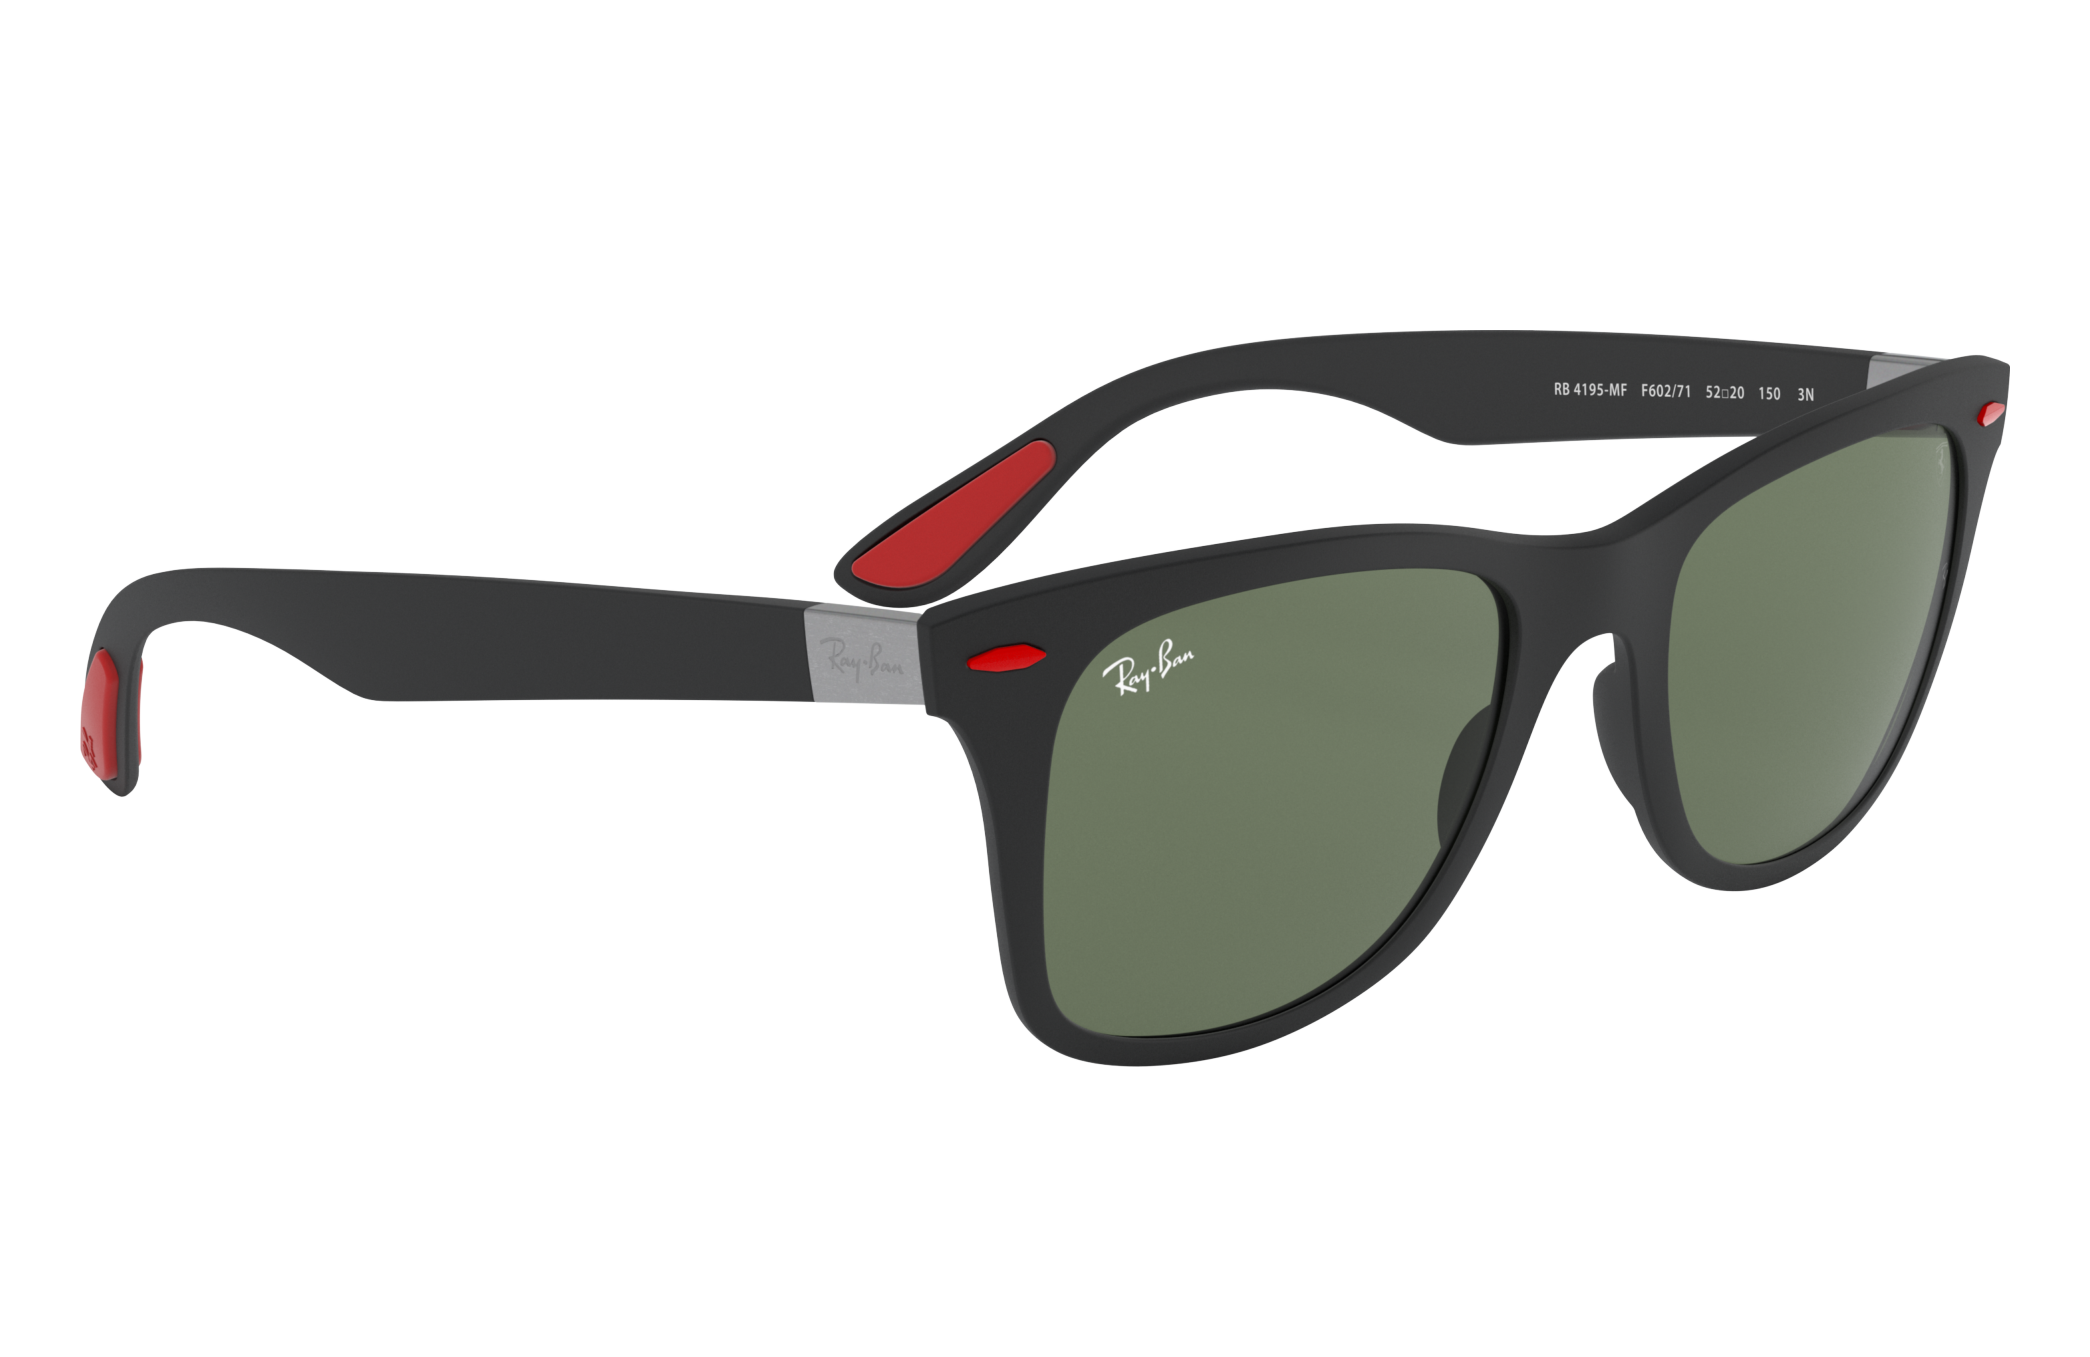 ray ban liteforce aviator review